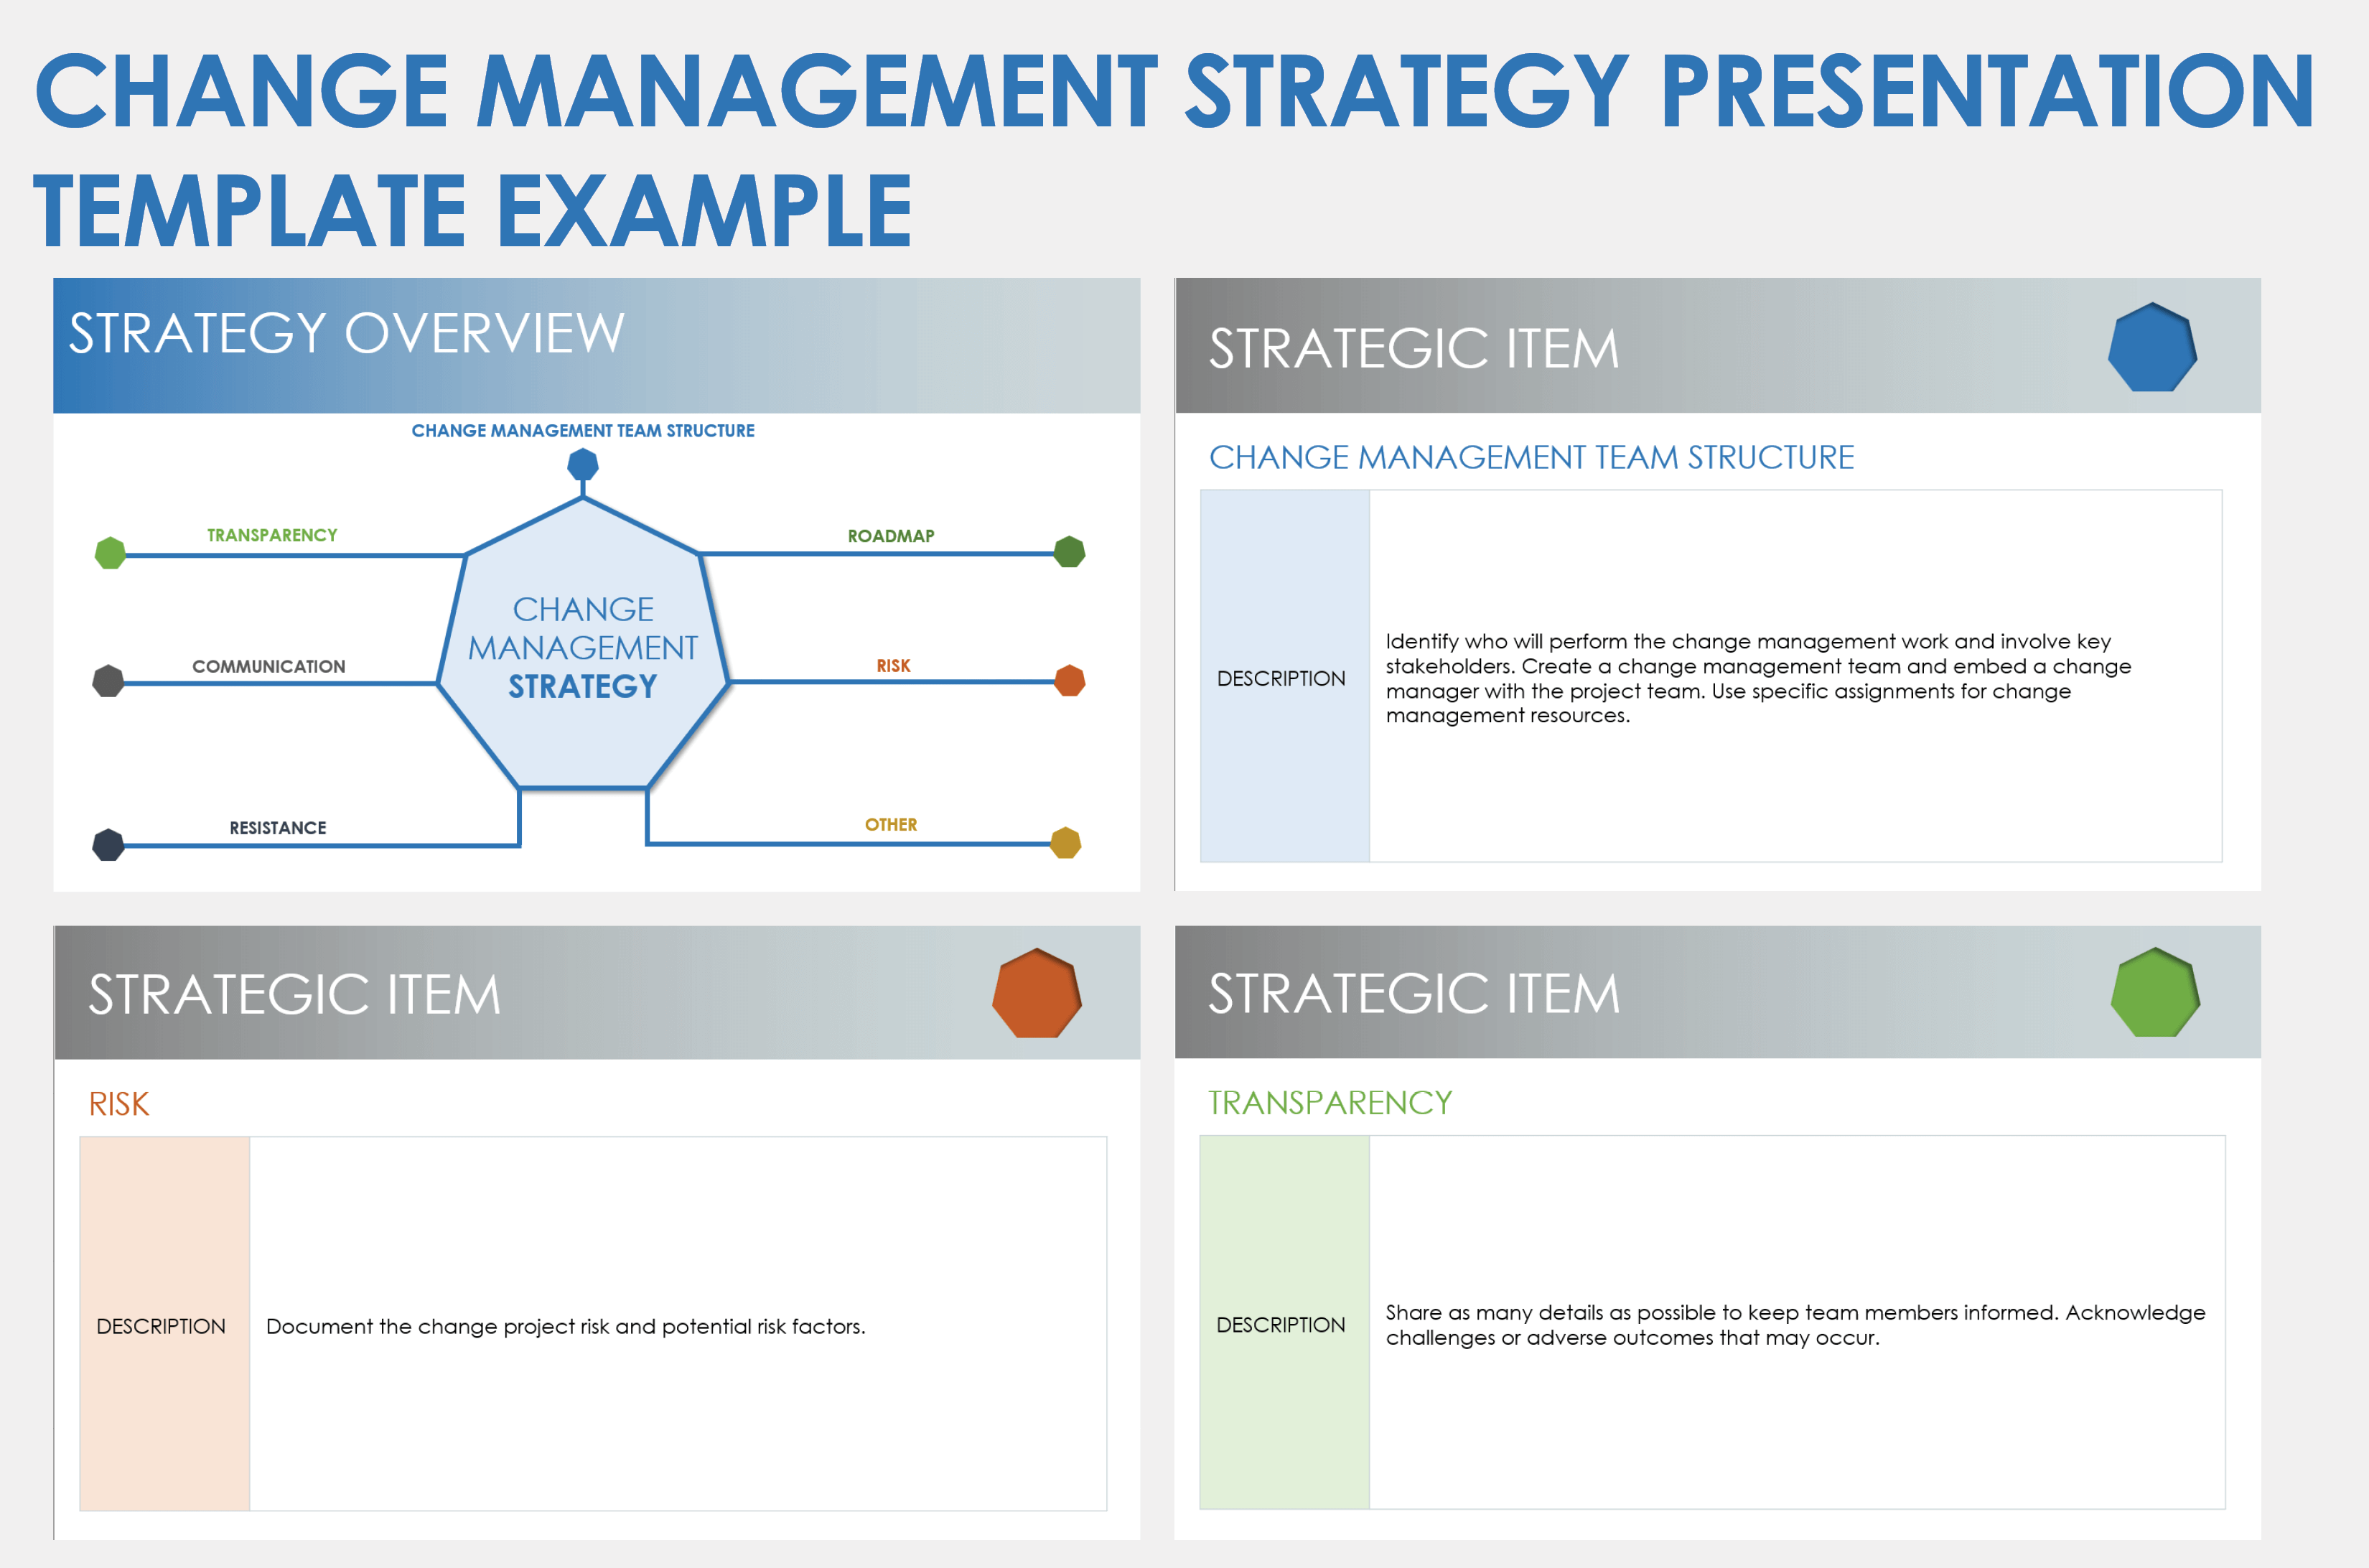 Change Management Strategy Presentation Example Template